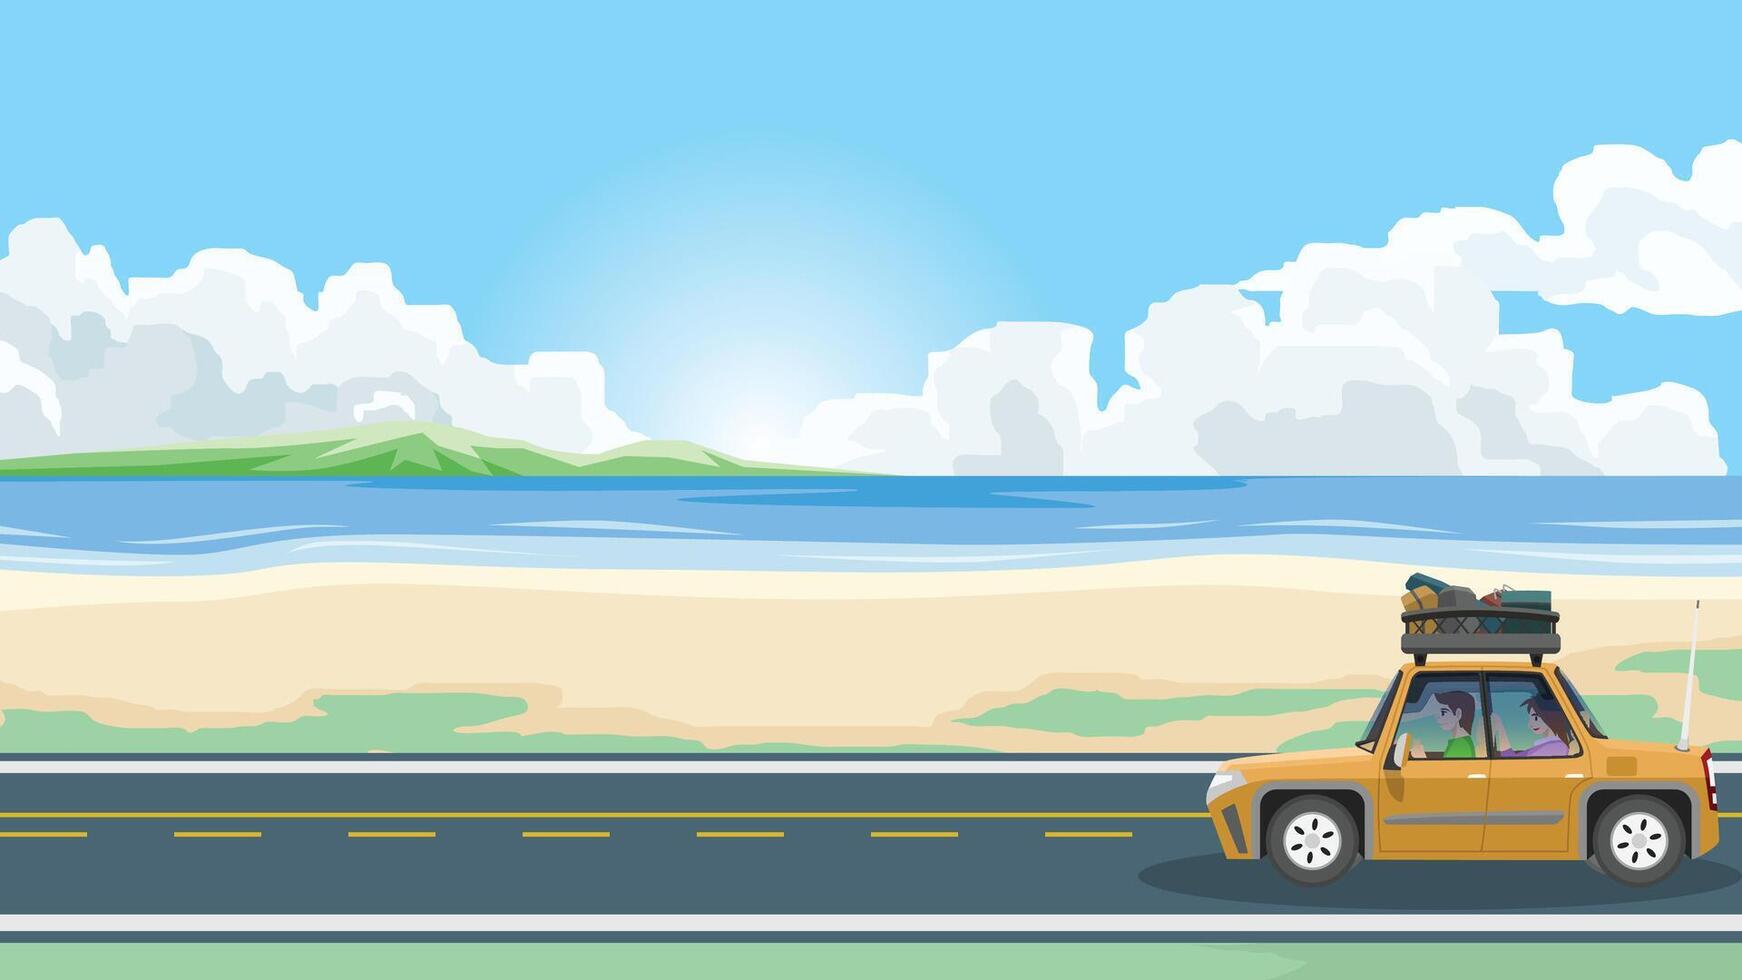 Family sedan with rack and full luggage. Families couples drive on smooth asphalt roads beside beaches and the vast sea. In the background there are pigs perched under clouds and a bright blue sky. vector